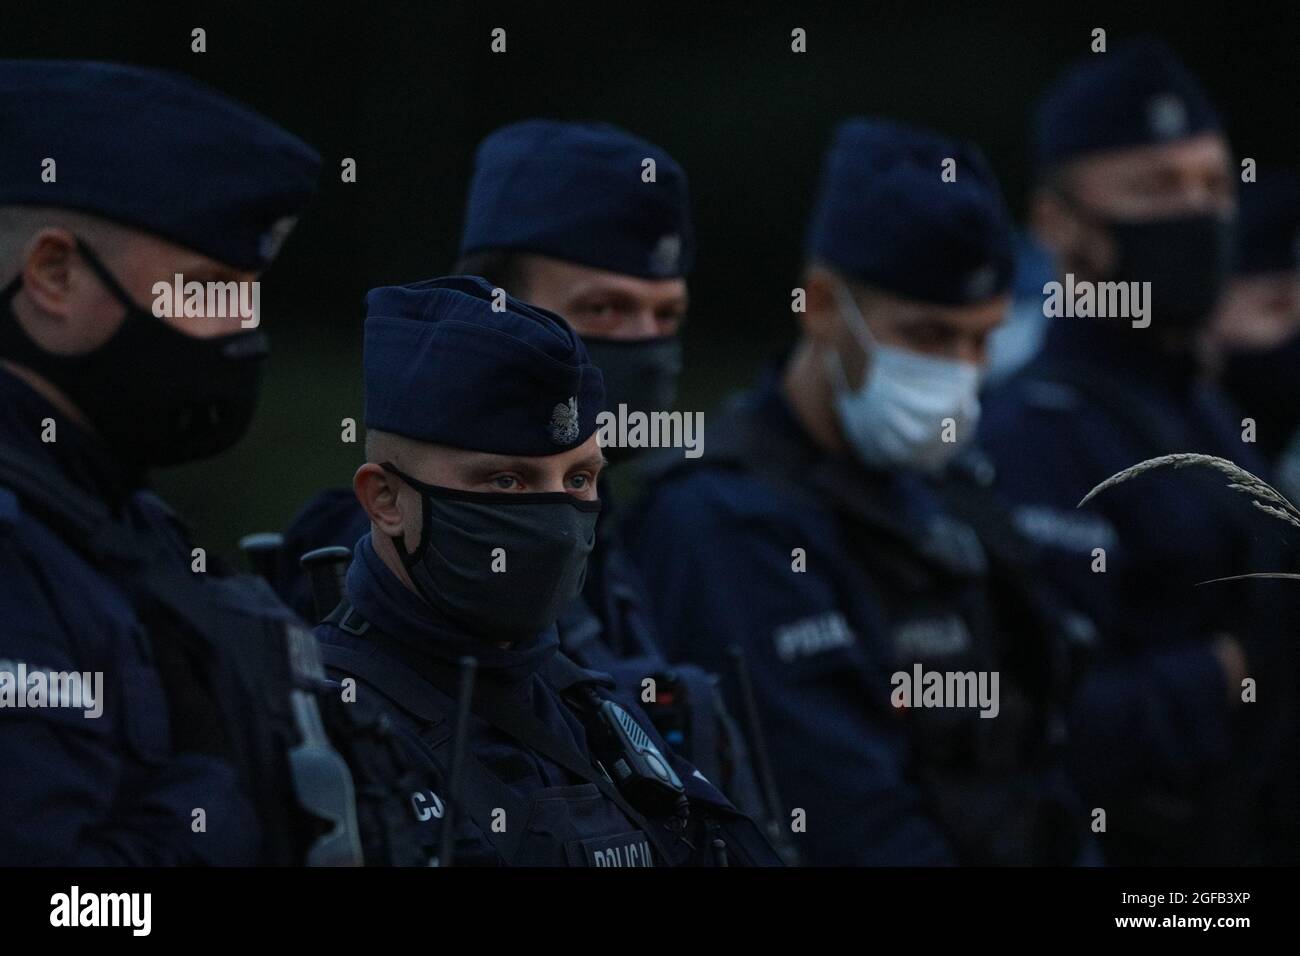 Policemen are seen in Usnarz Gorny, Poland on August 24, 2021. For 16 days in a row 32 Afghan refugees have been stuck at the Polsh-Belarusian border without food or shelter. Polish authorities deny the migrants have ever reached Polish soil contraty to reports from local individuals who have stated the group has been pushed back by border guards. In August of this year nearly 3000 refugees have been reported attempting to cross the border compred to less than 100 in all of 2020. The surge in border crossings comes as a result of actions by the Lukashenko regime in retaliation for EU sanctions Stock Photo